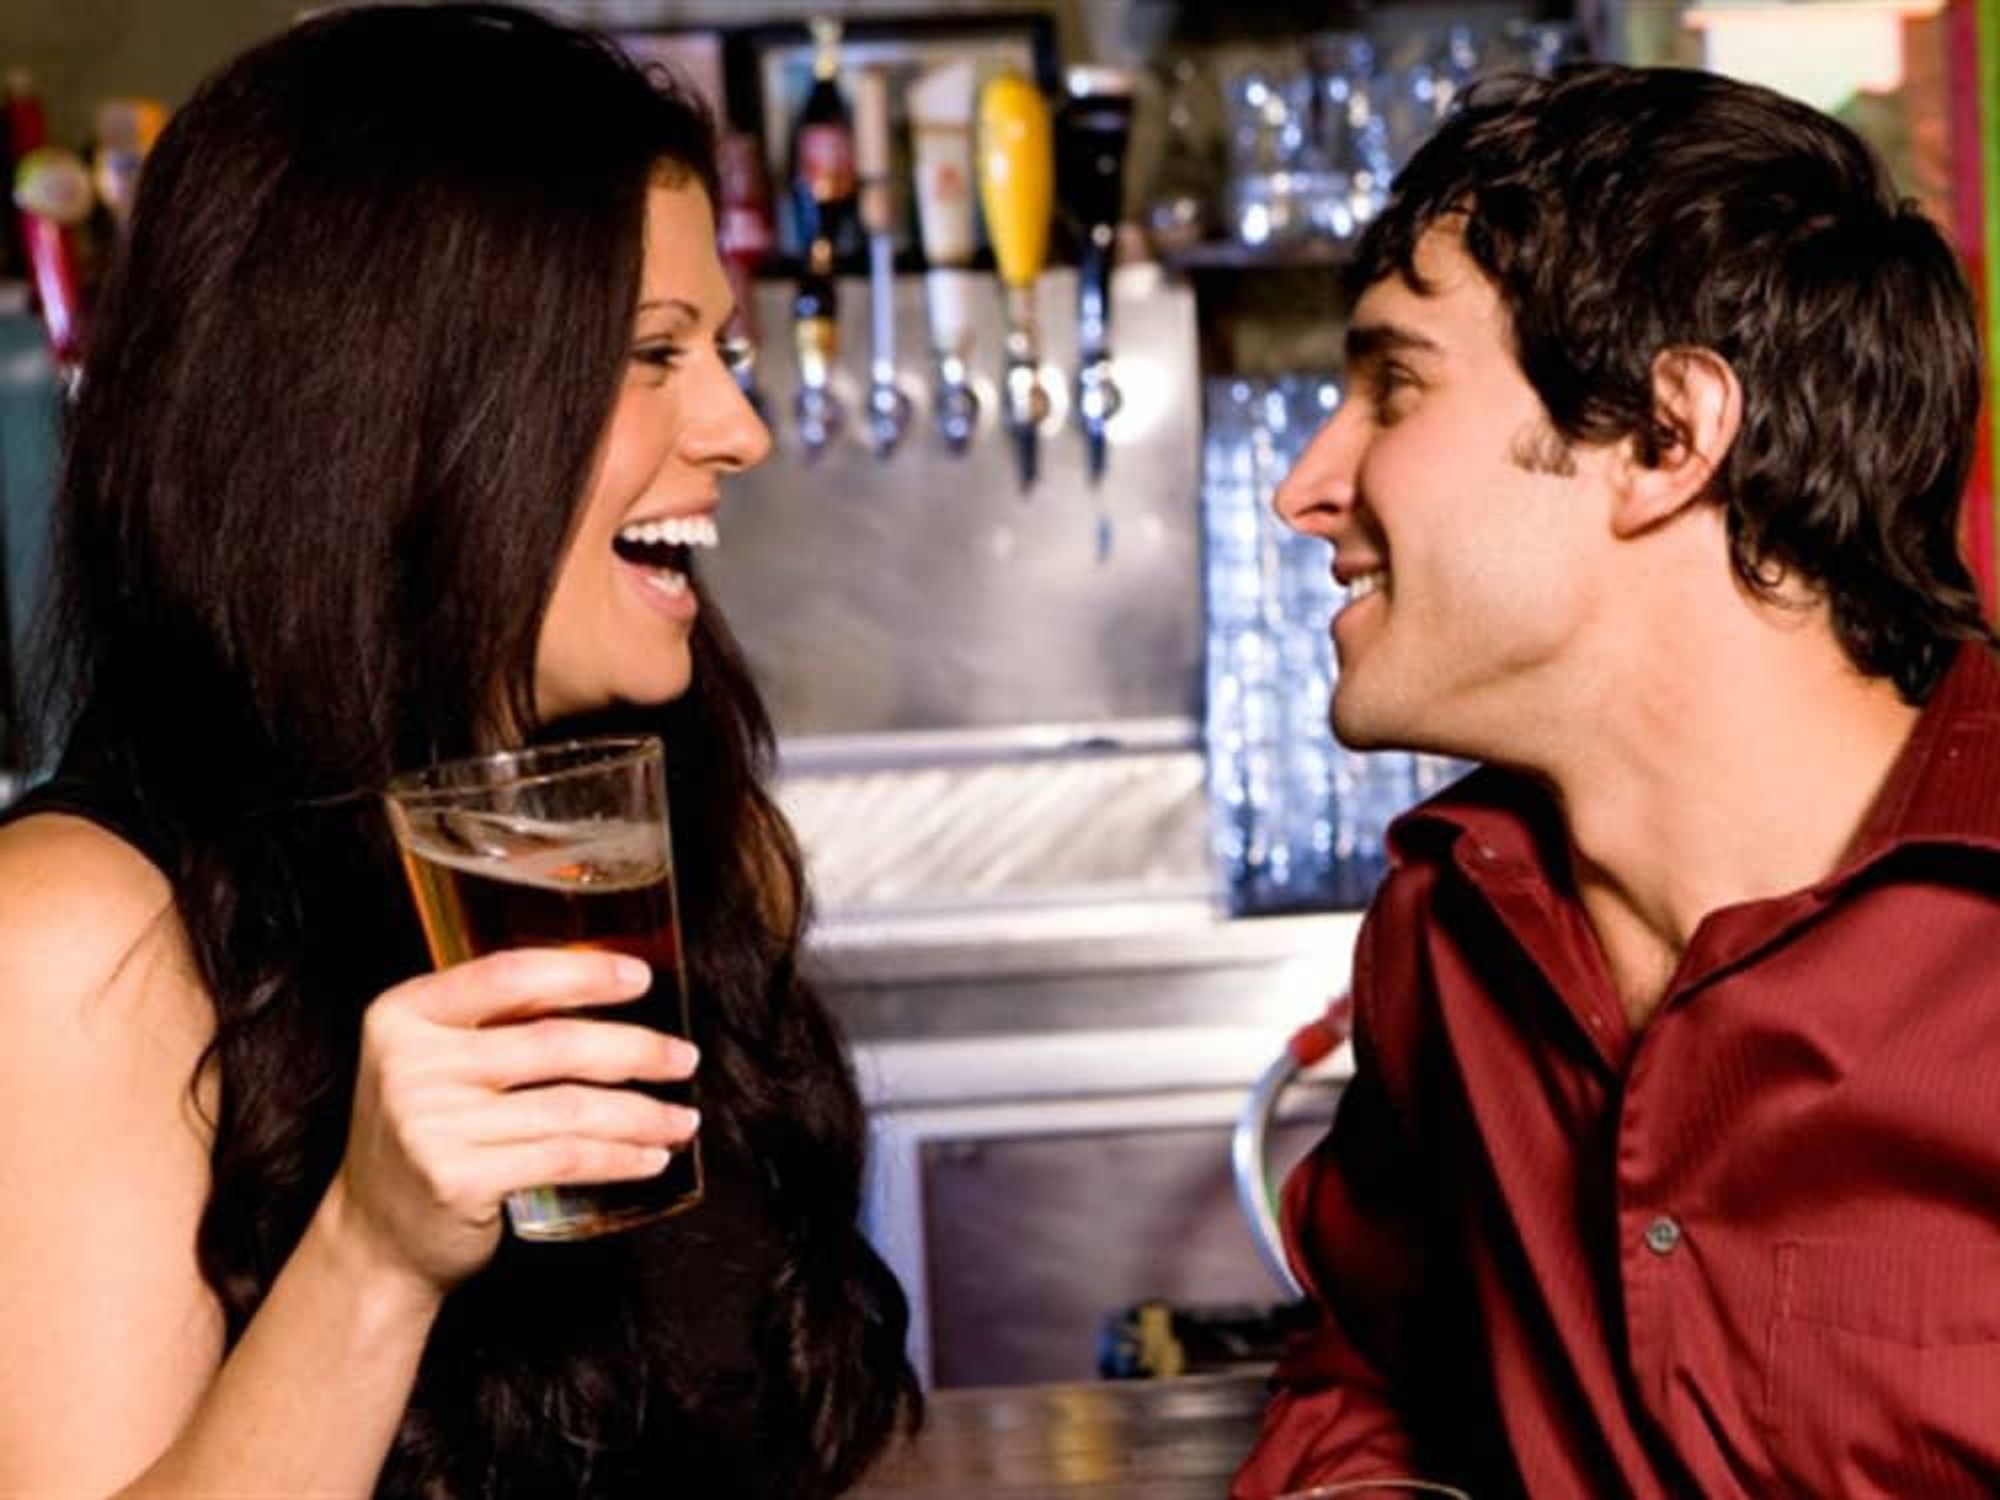 https://dallas.culturemap.com/media-library/couple-on-a-date-drinking-beer.jpg?id=31657873&width=2000&height=1500&quality=85&coordinates=0%2C0%2C0%2C0